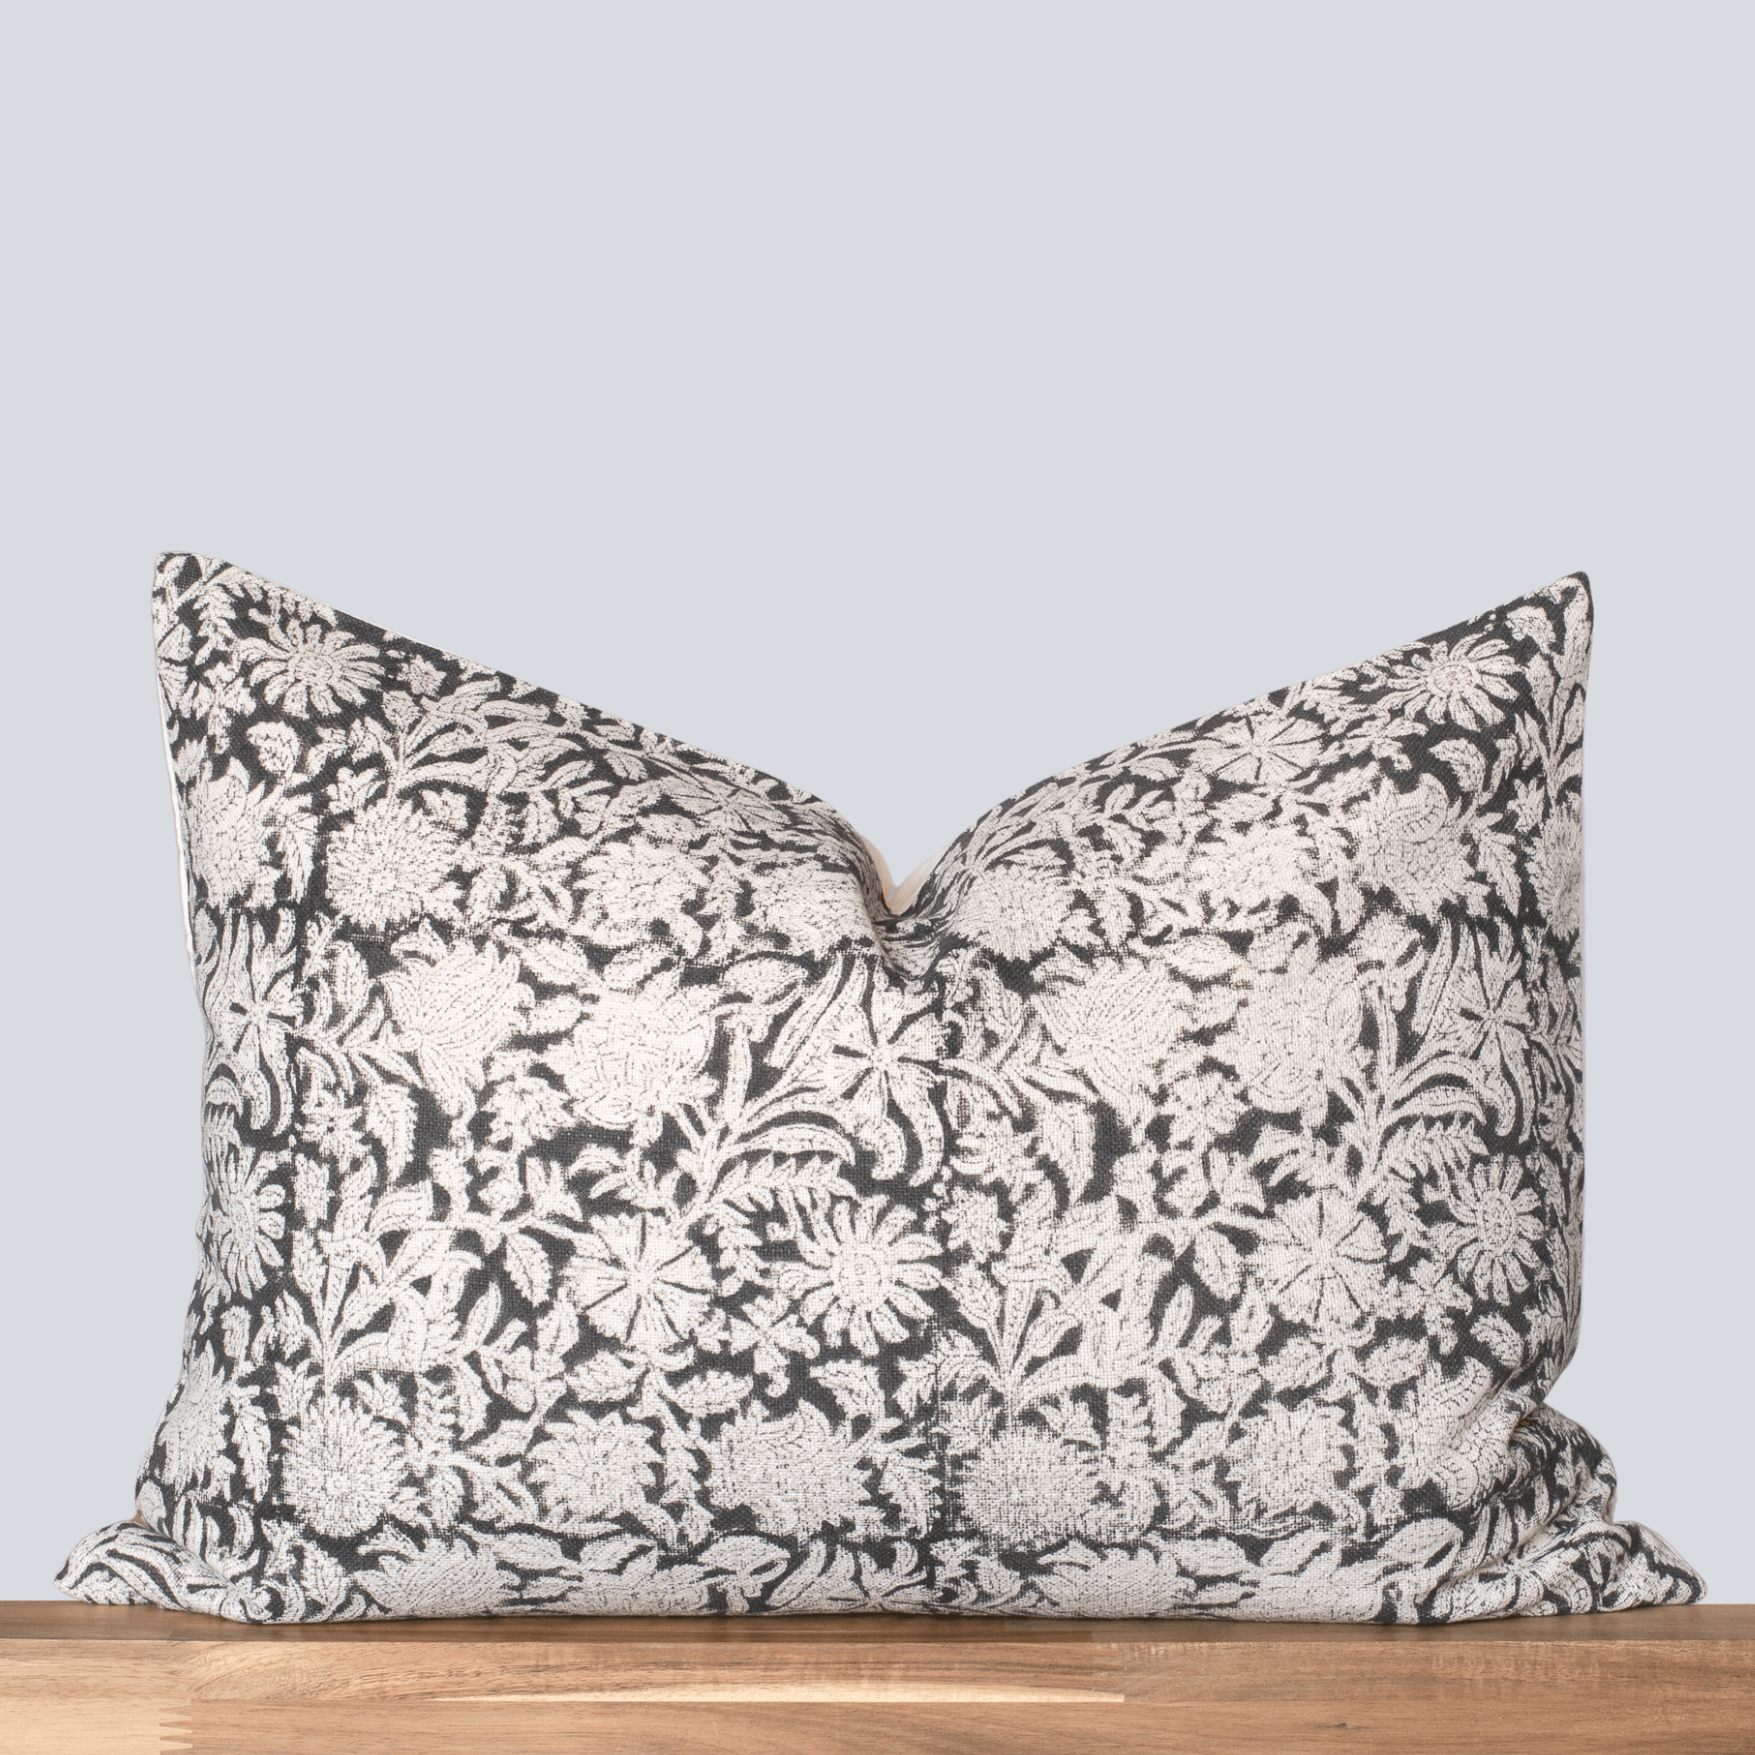 Handmade Floral Print Pillow Cover